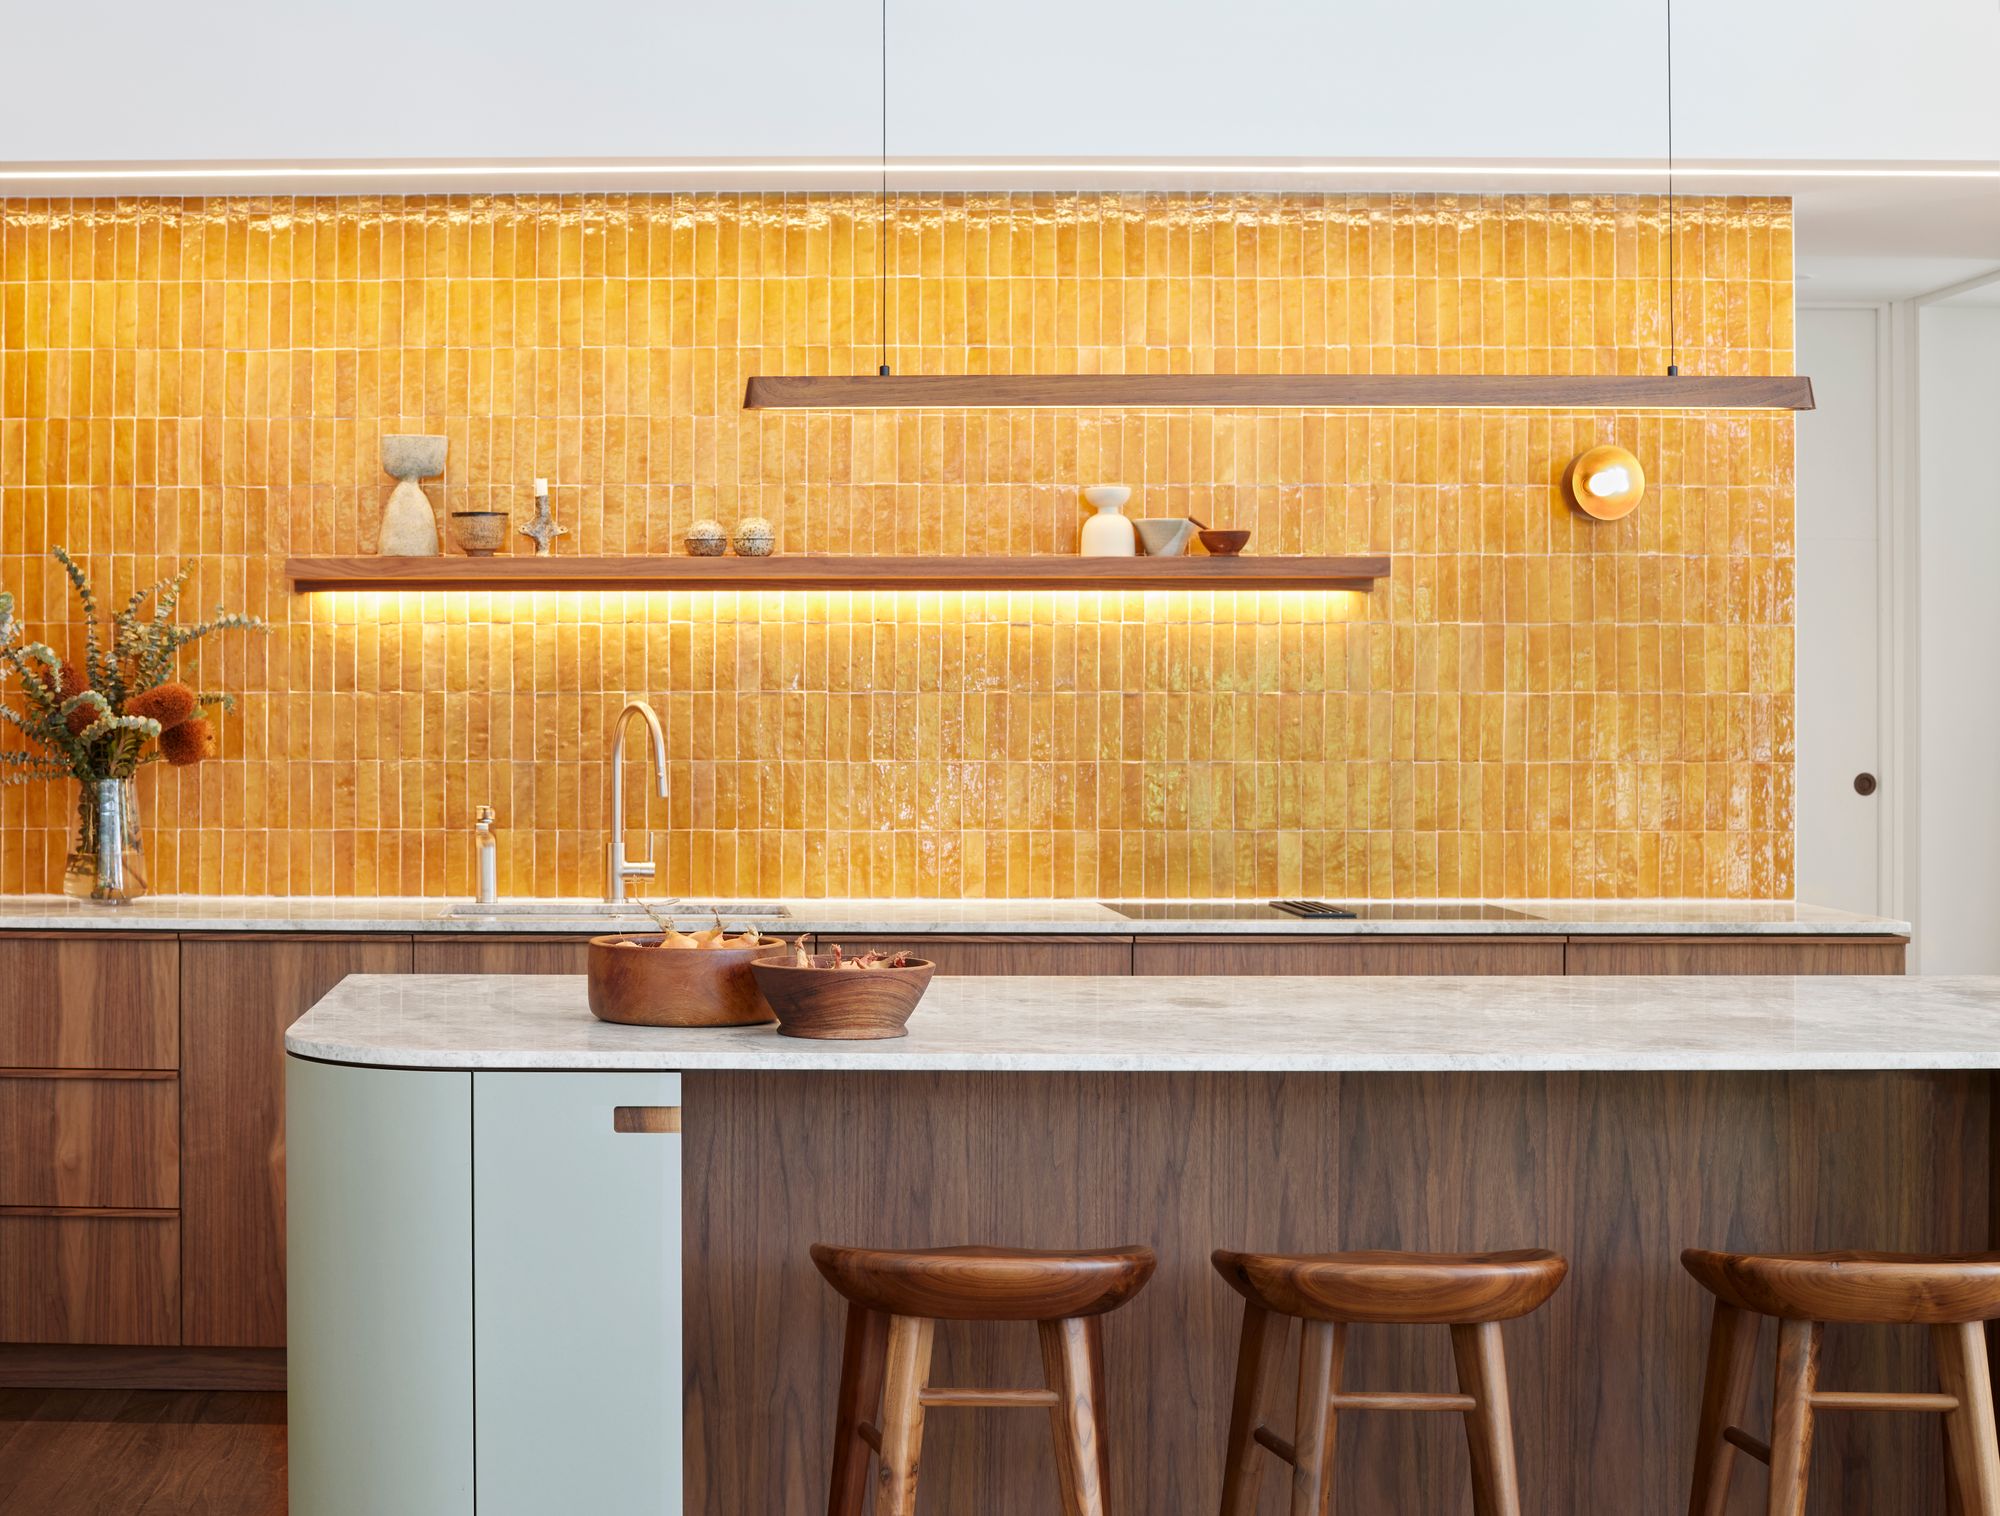  Fluxwood Tenn Pendant. Photography by Fiona Galbraith. The image features a modern kitchen interior with a minimalist design. The focal point is a textured, honey-yellow tiled backsplash that extends from the countertop to the ceiling. Below it, there is a sleek kitchen counter with a marble surface, featuring an undermount sink and a modern faucet. Above the backsplash, a wooden shelf holds various decorative items, and there's a warm, under-shelf lighting that adds ambiance to the space. Three wooden bar stools are placed in front of the kitchen island, which has a base with a pale green finish that contrasts with the rich wooden tone of the cabinetry. The overall aesthetic is clean, warm, and inviting with a touch of rustic charm through the use of natural materials.